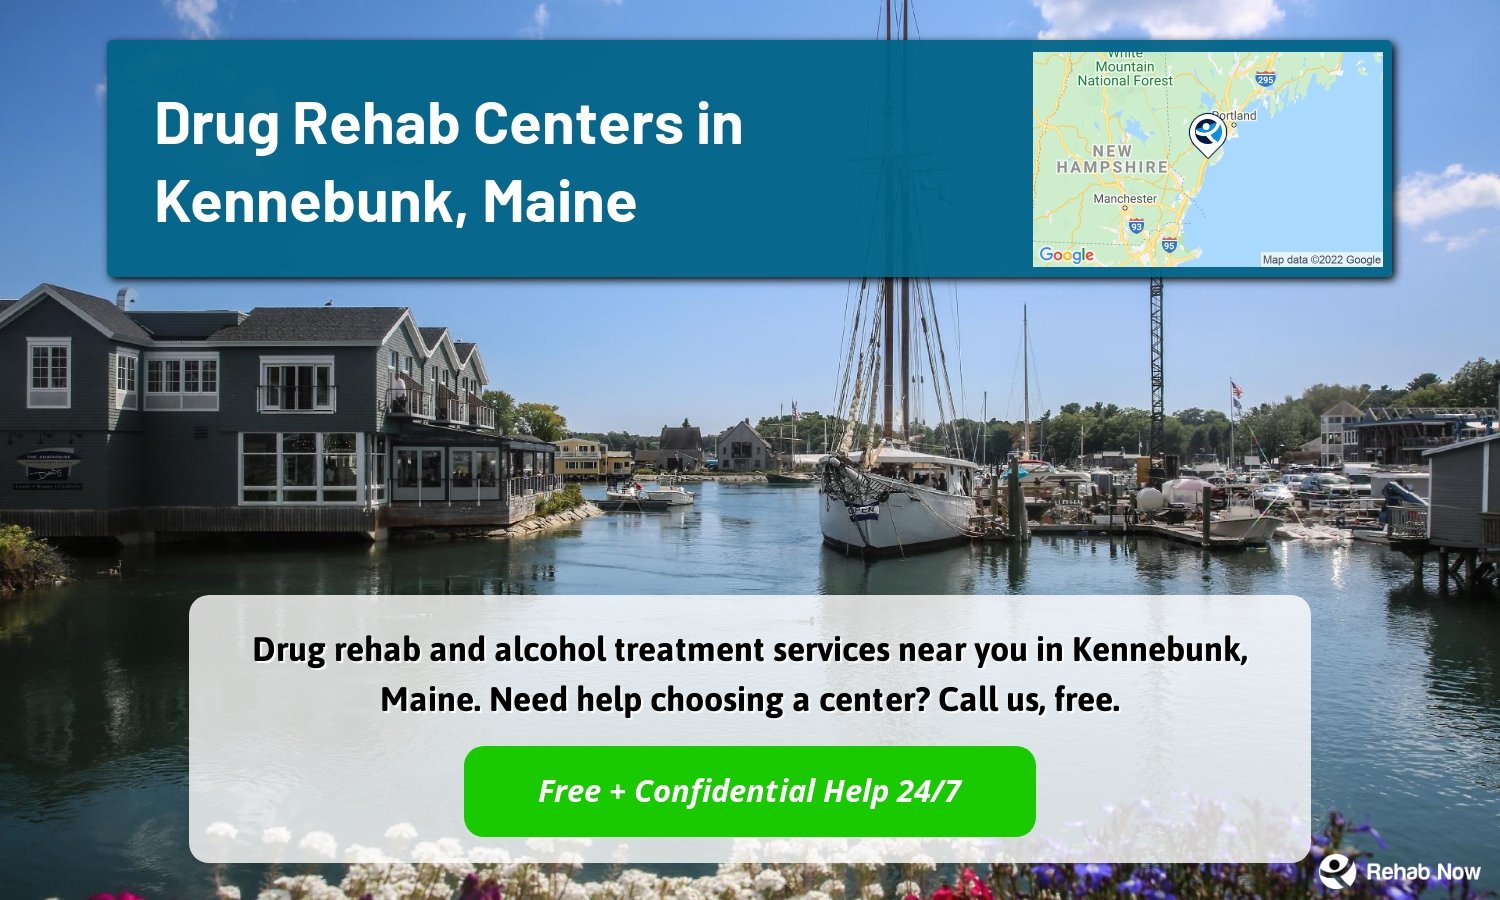 Drug rehab and alcohol treatment services near you in Kennebunk, Maine. Need help choosing a center? Call us, free.